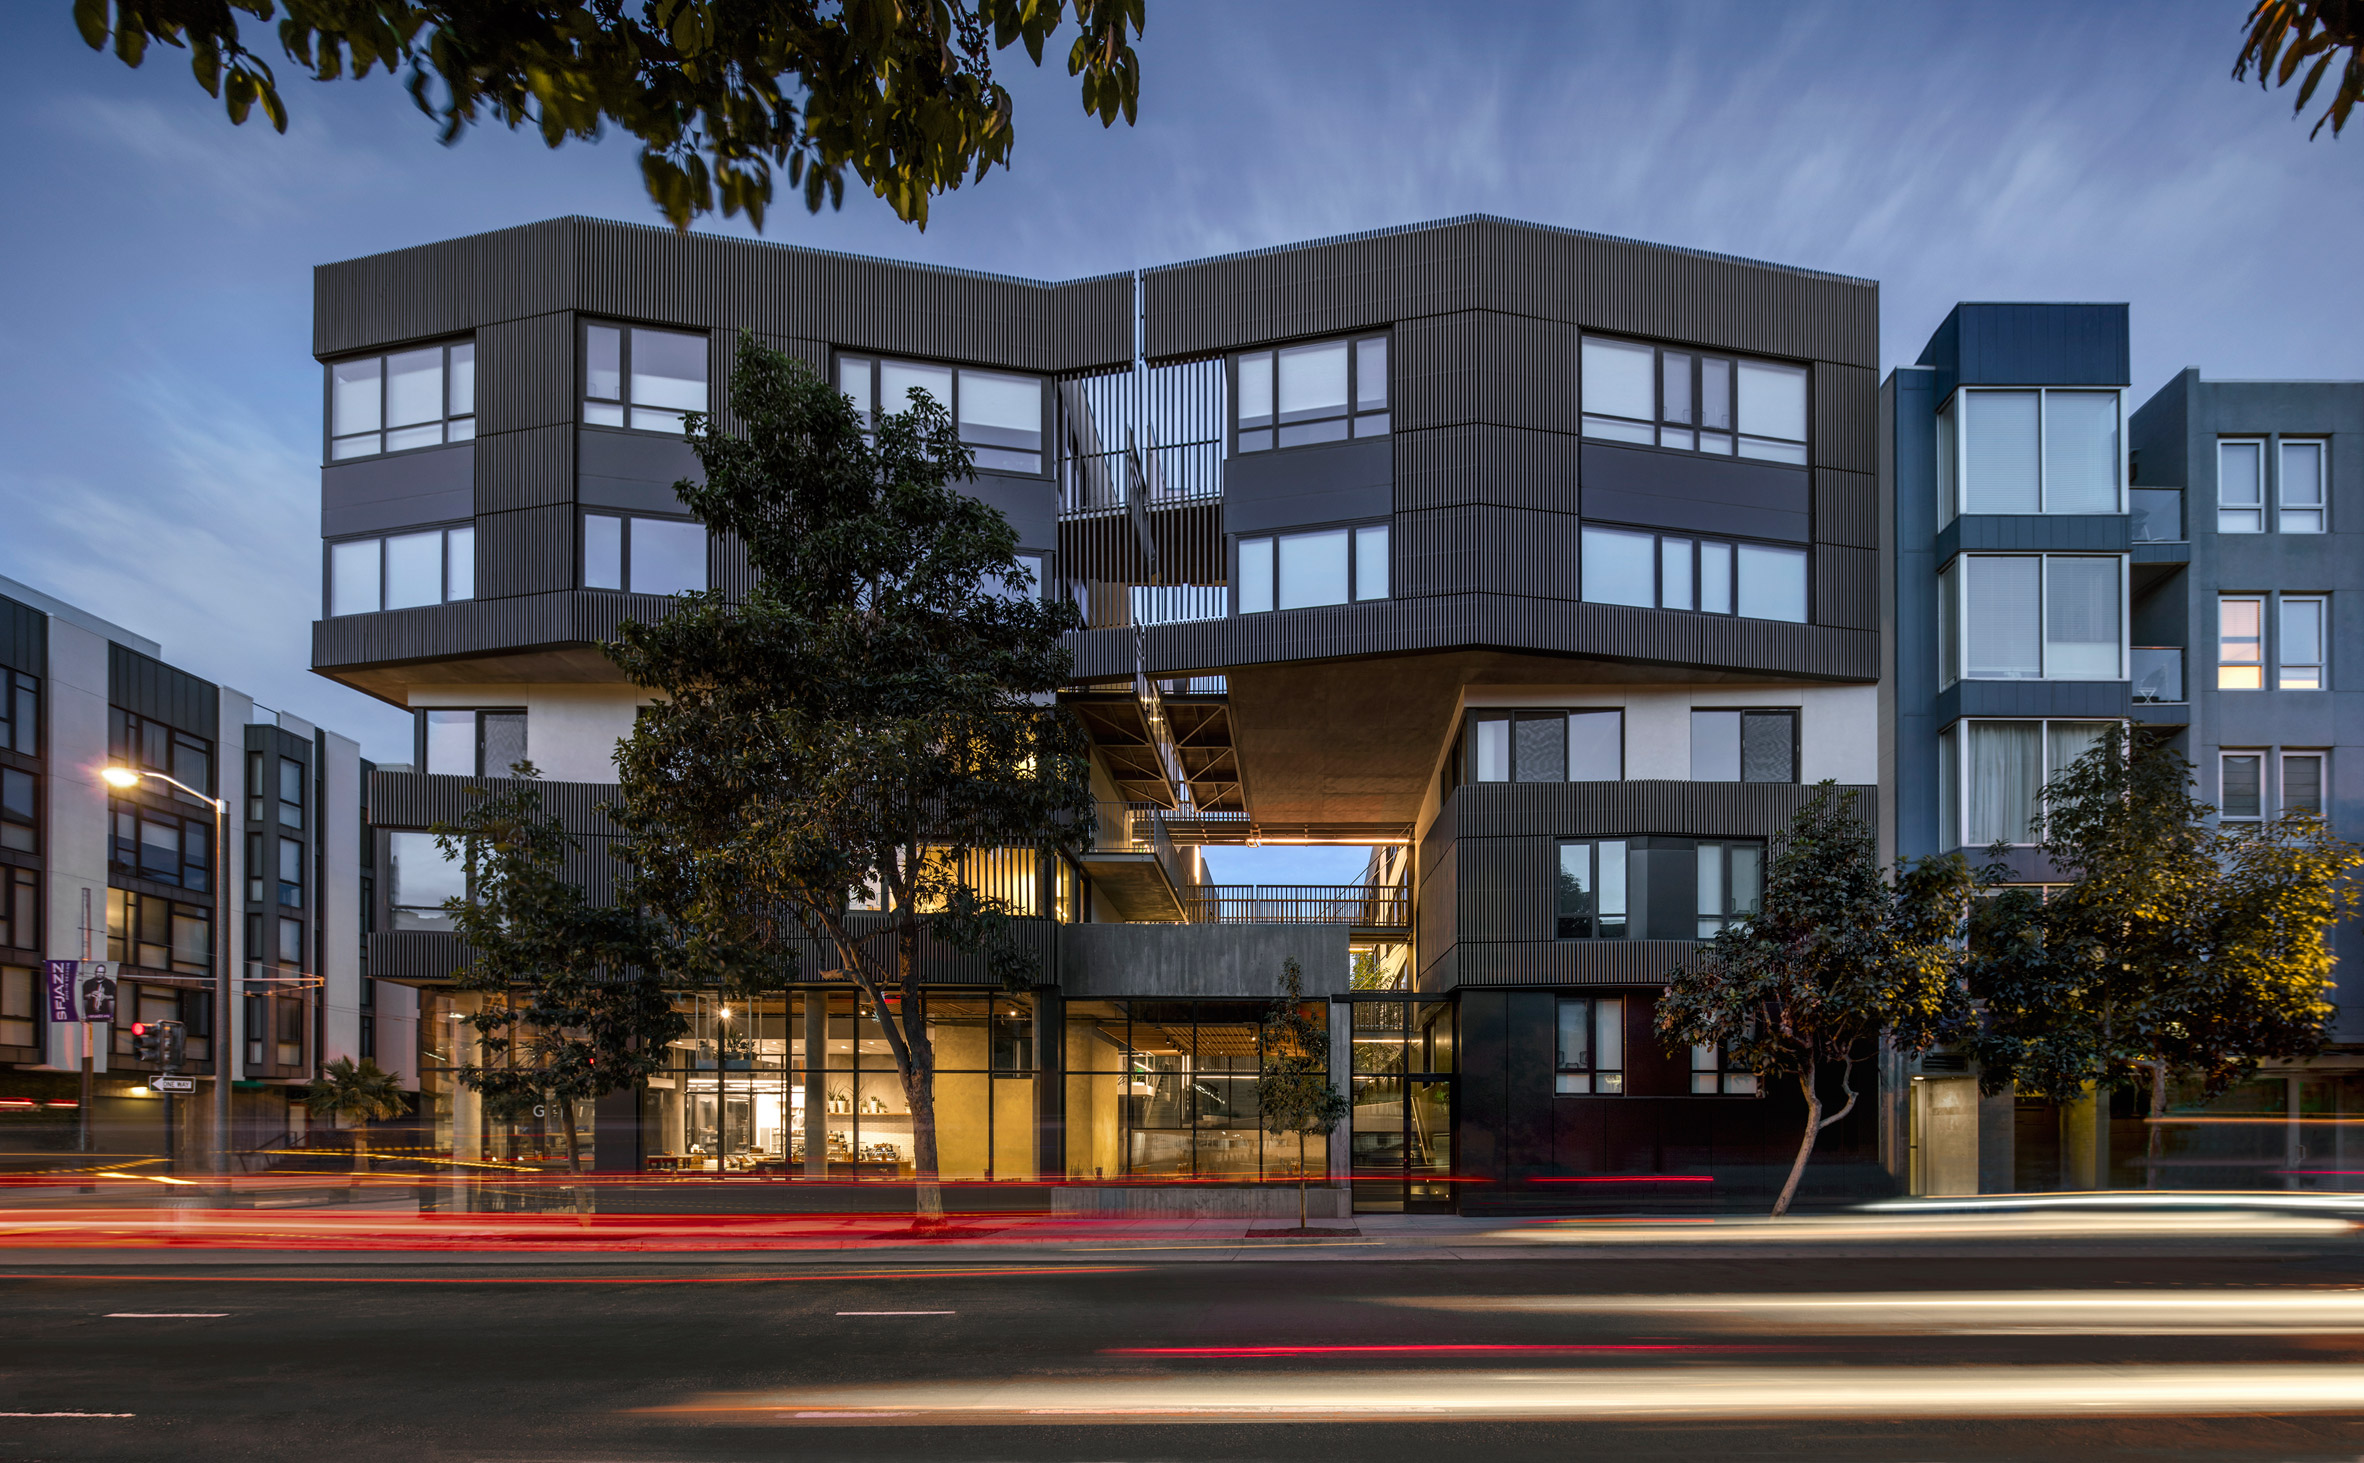 Fougeron Architecture clads a San Francisco condo building in dark wooden dowels